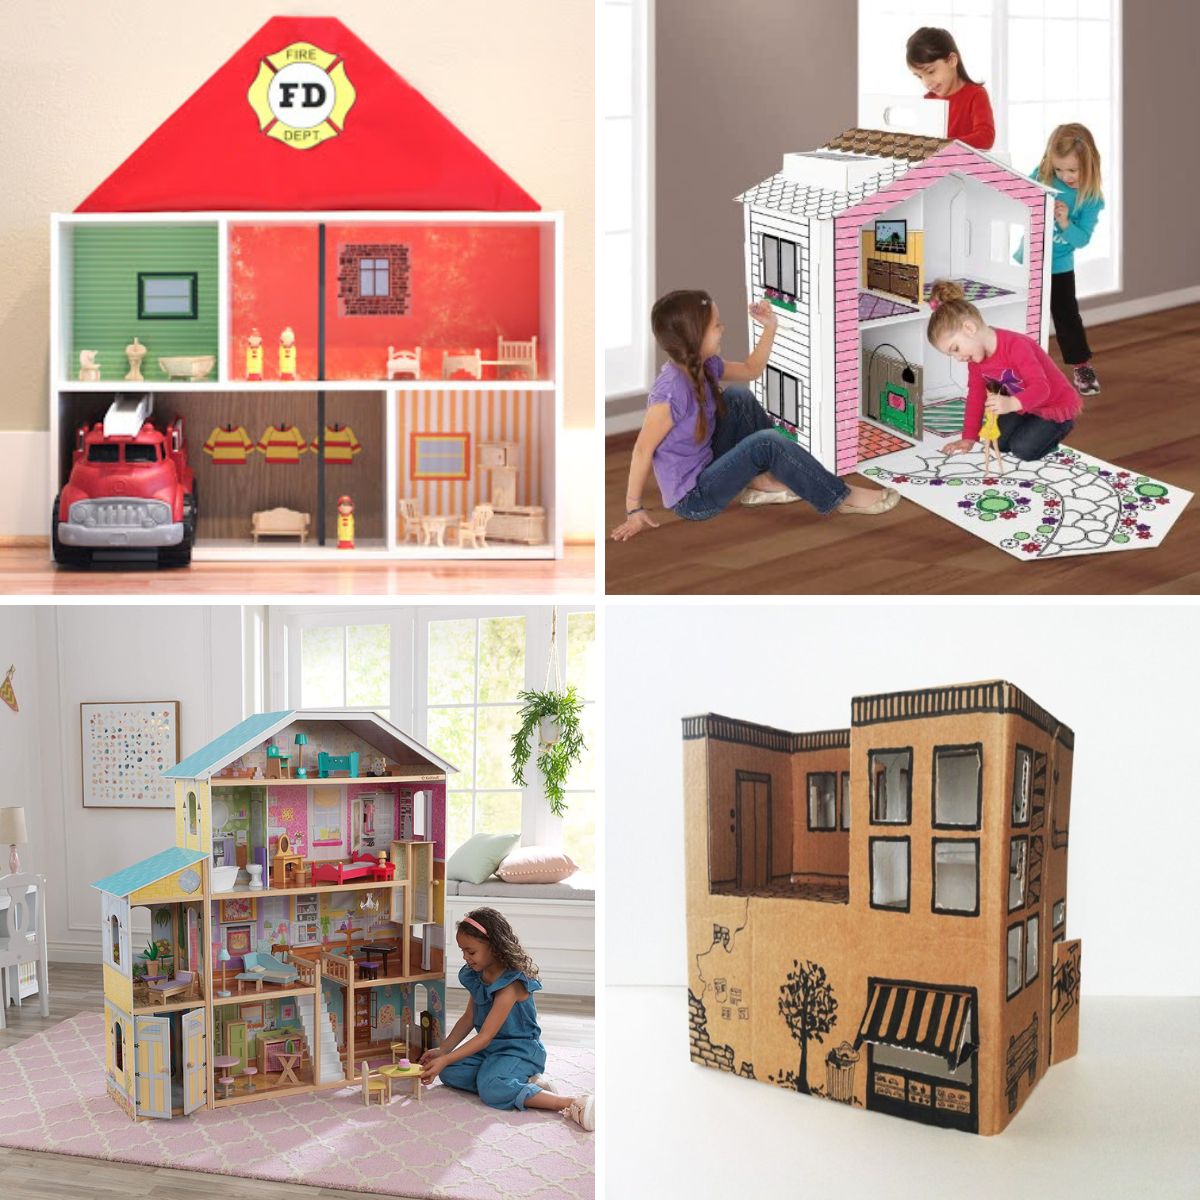 4 images of dream doll houses